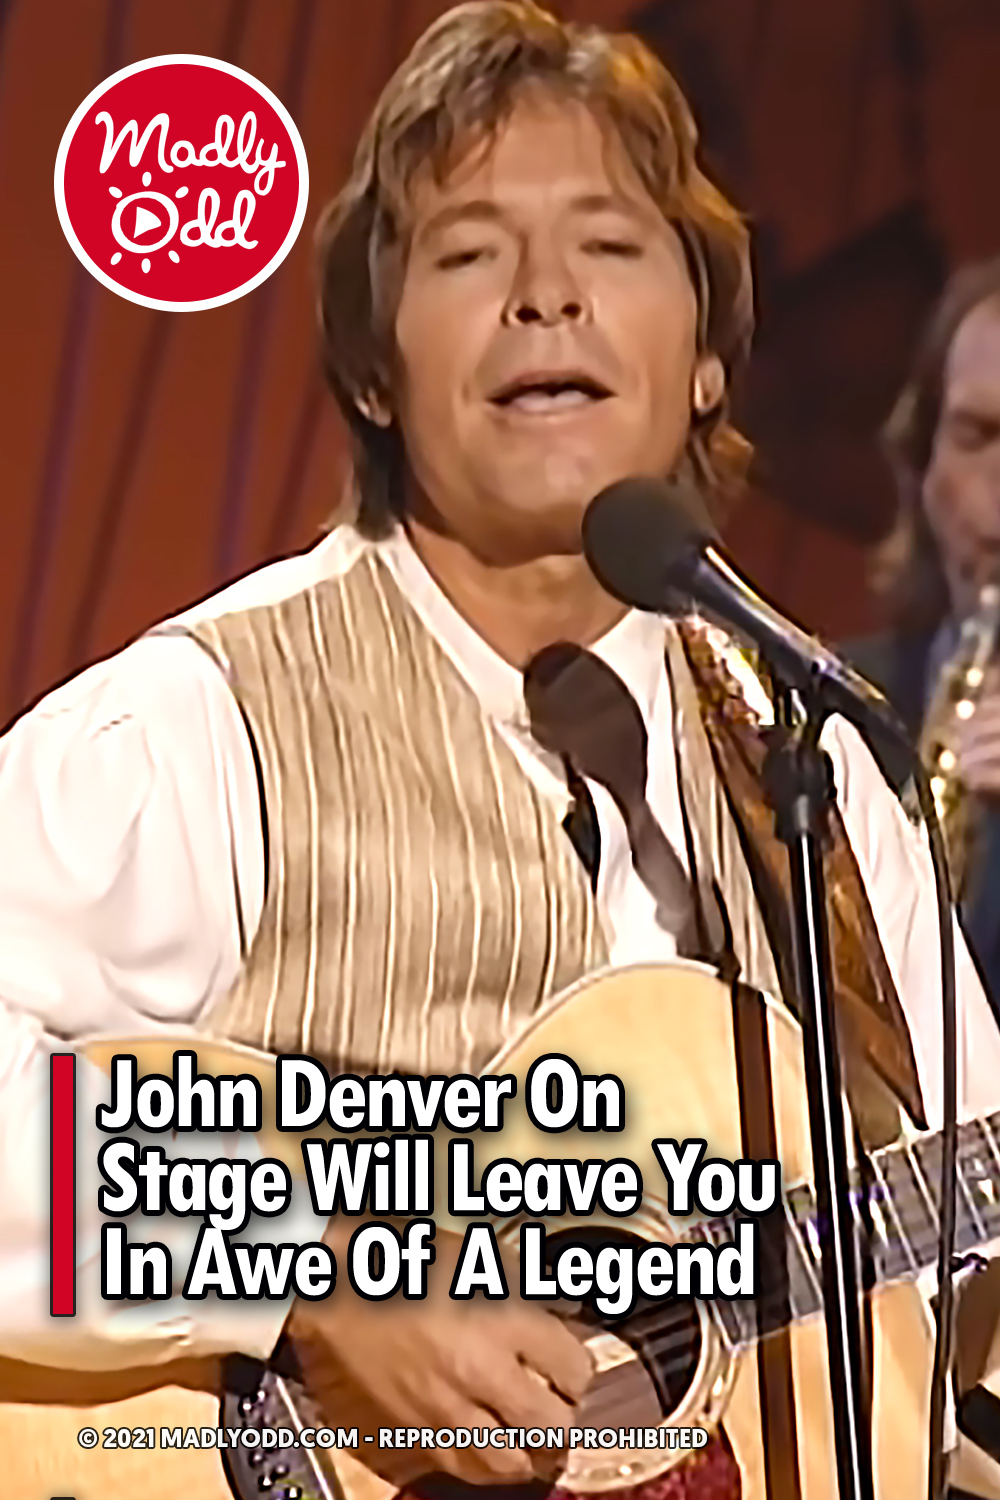 John Denver On Stage Will Leave You In Awe Of A Legend